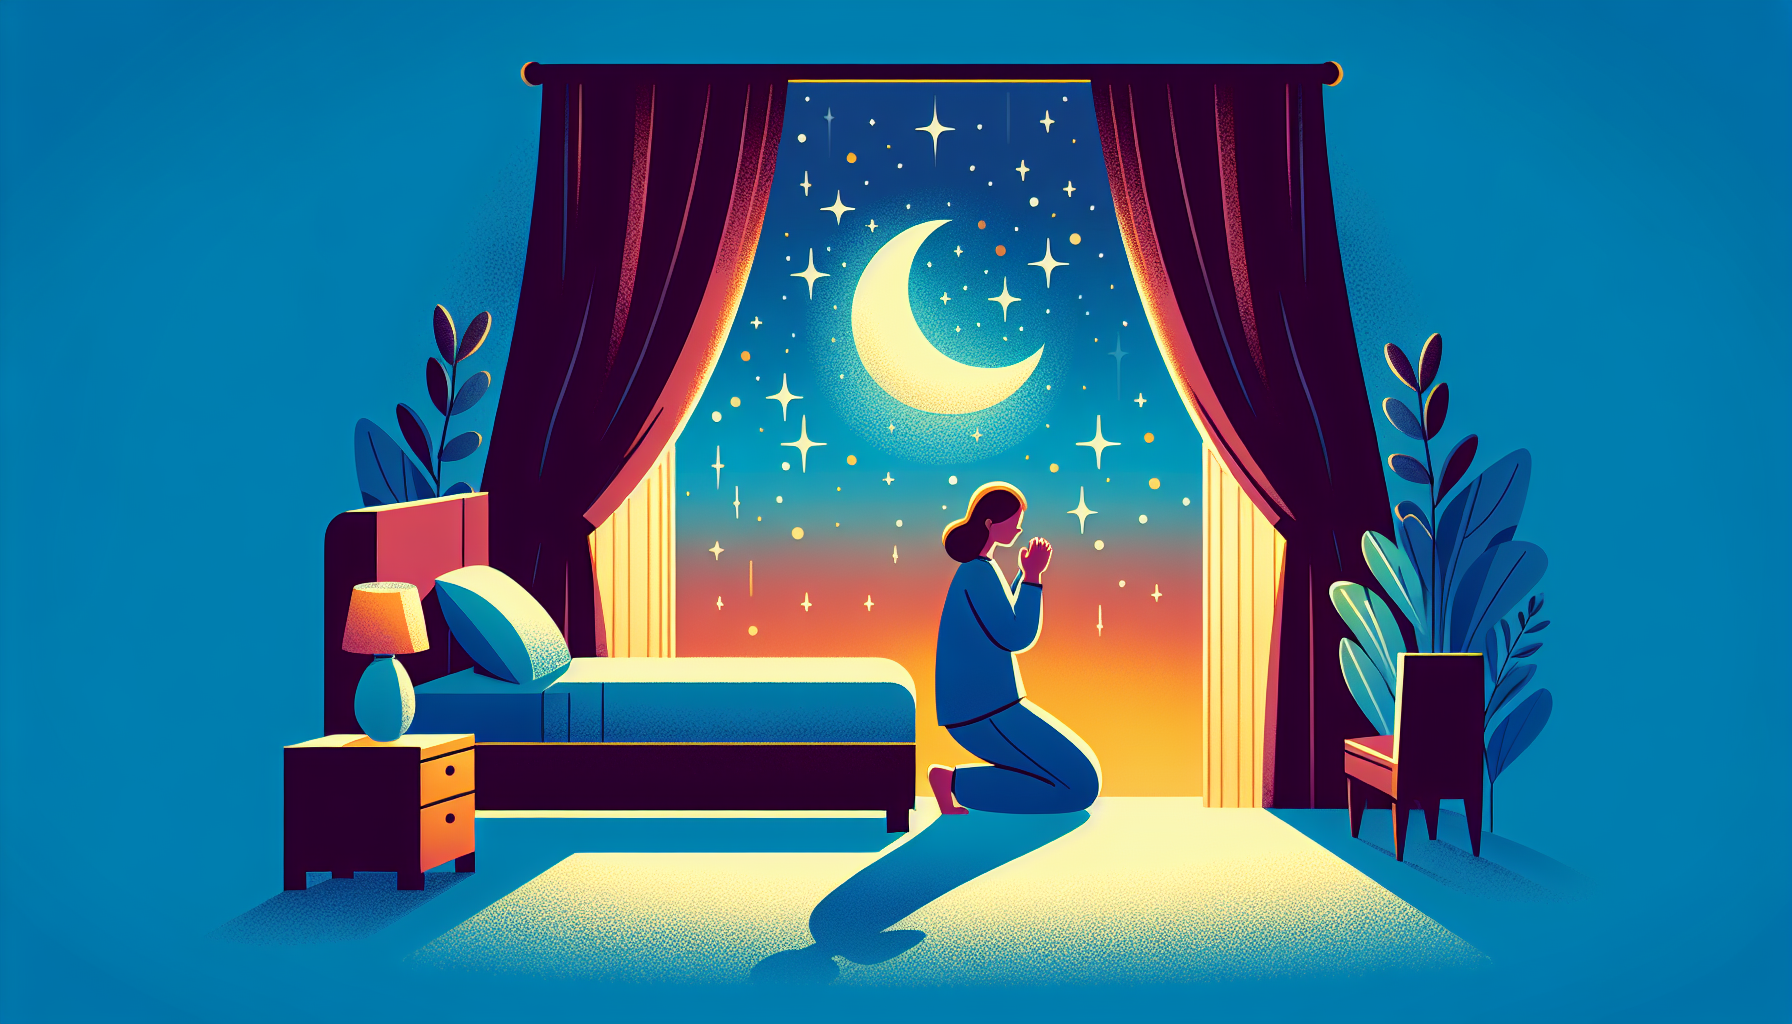 An enchanting night sky filled with twinkling stars and a bright crescent moon, casting a gentle glow over a serene bedroom. A person kneels beside their bed, hands clasped in prayer, with a peaceful